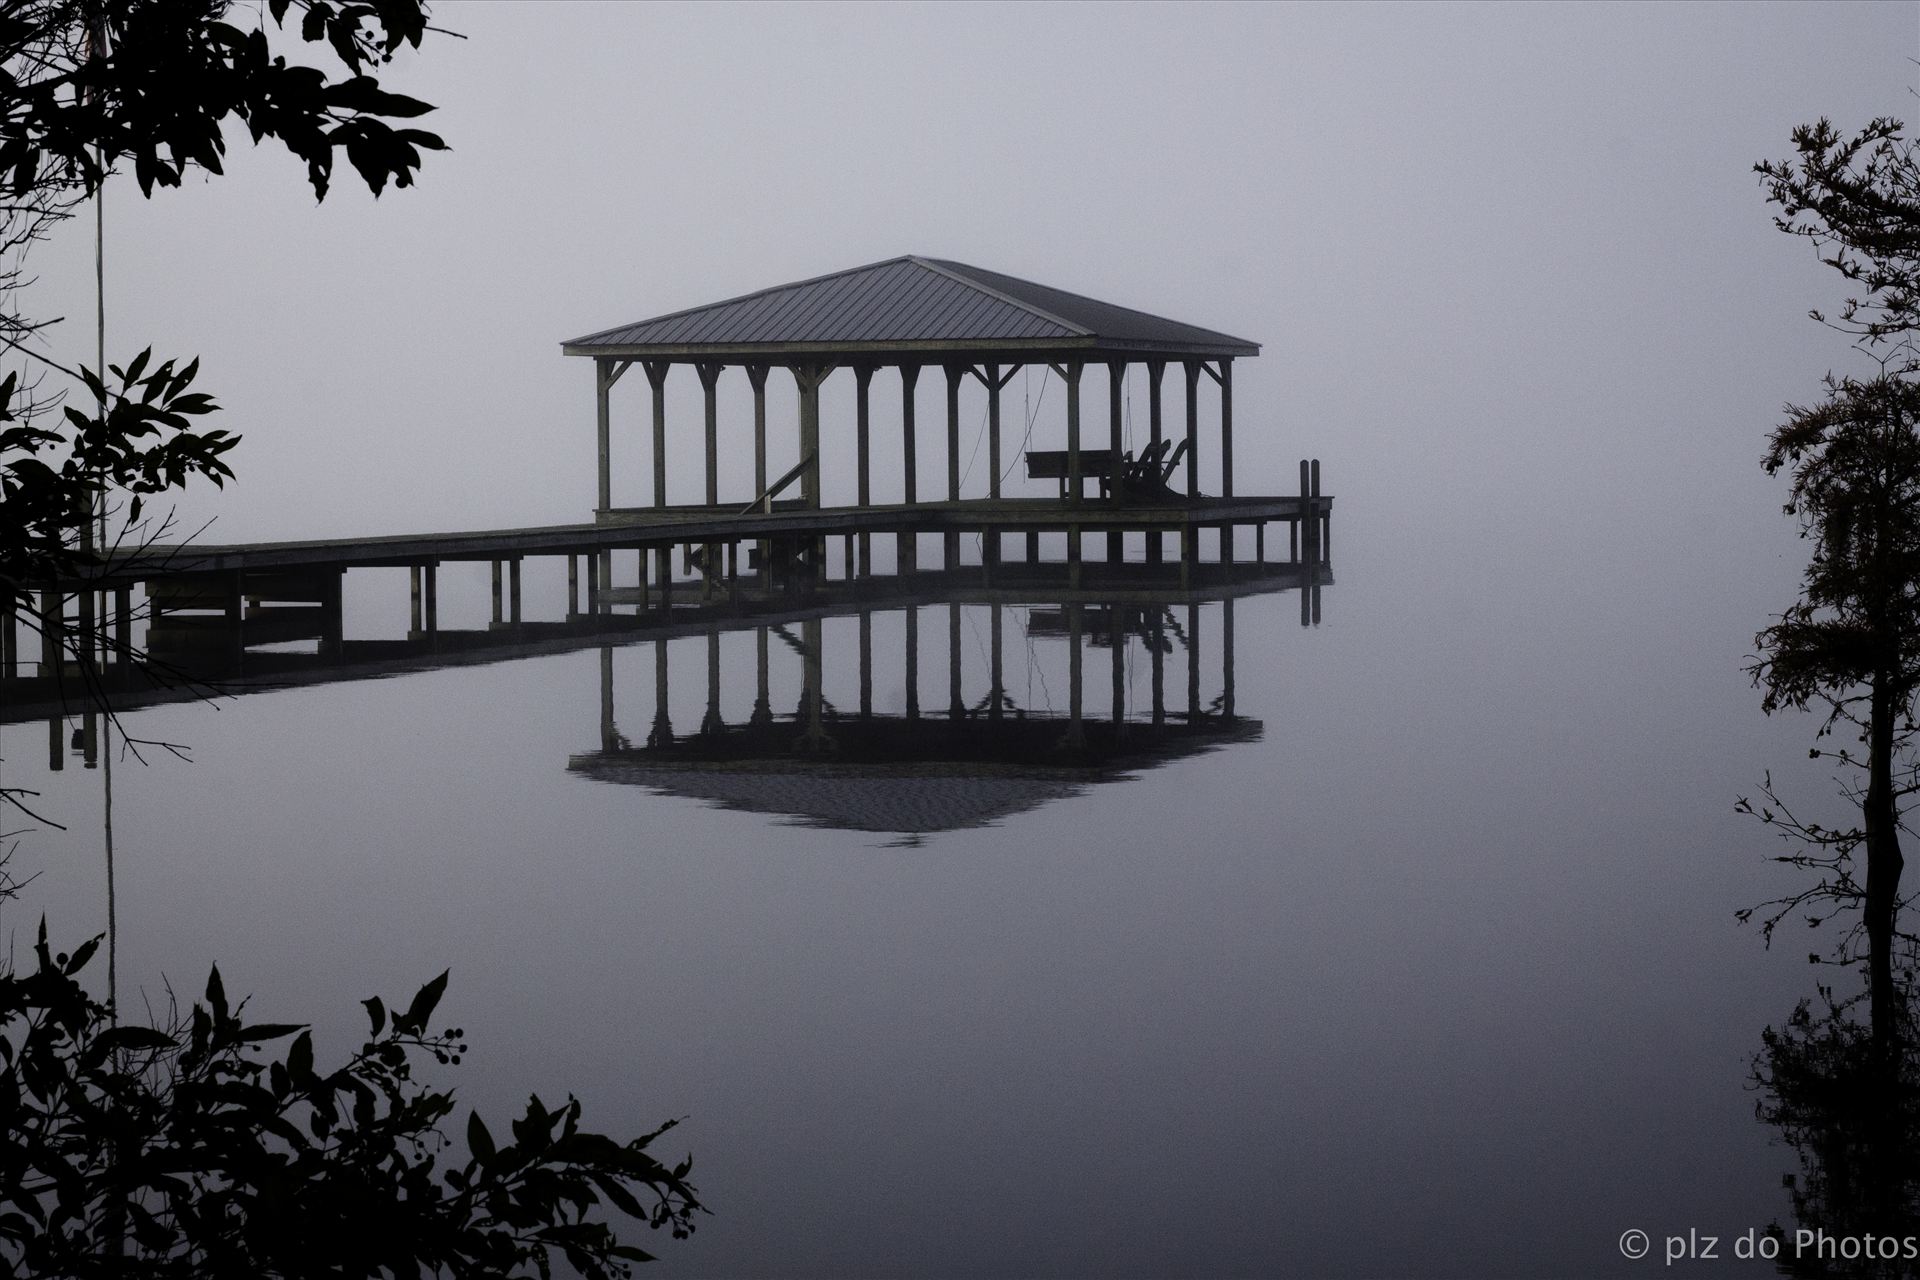 One Foggy Morning This image was taken at Lake Waccamaw, NC from my mother's yard one fall morning.  I hoped to capture the peacefulness and beauty that I saw this morning. by Patricia Zyzyk